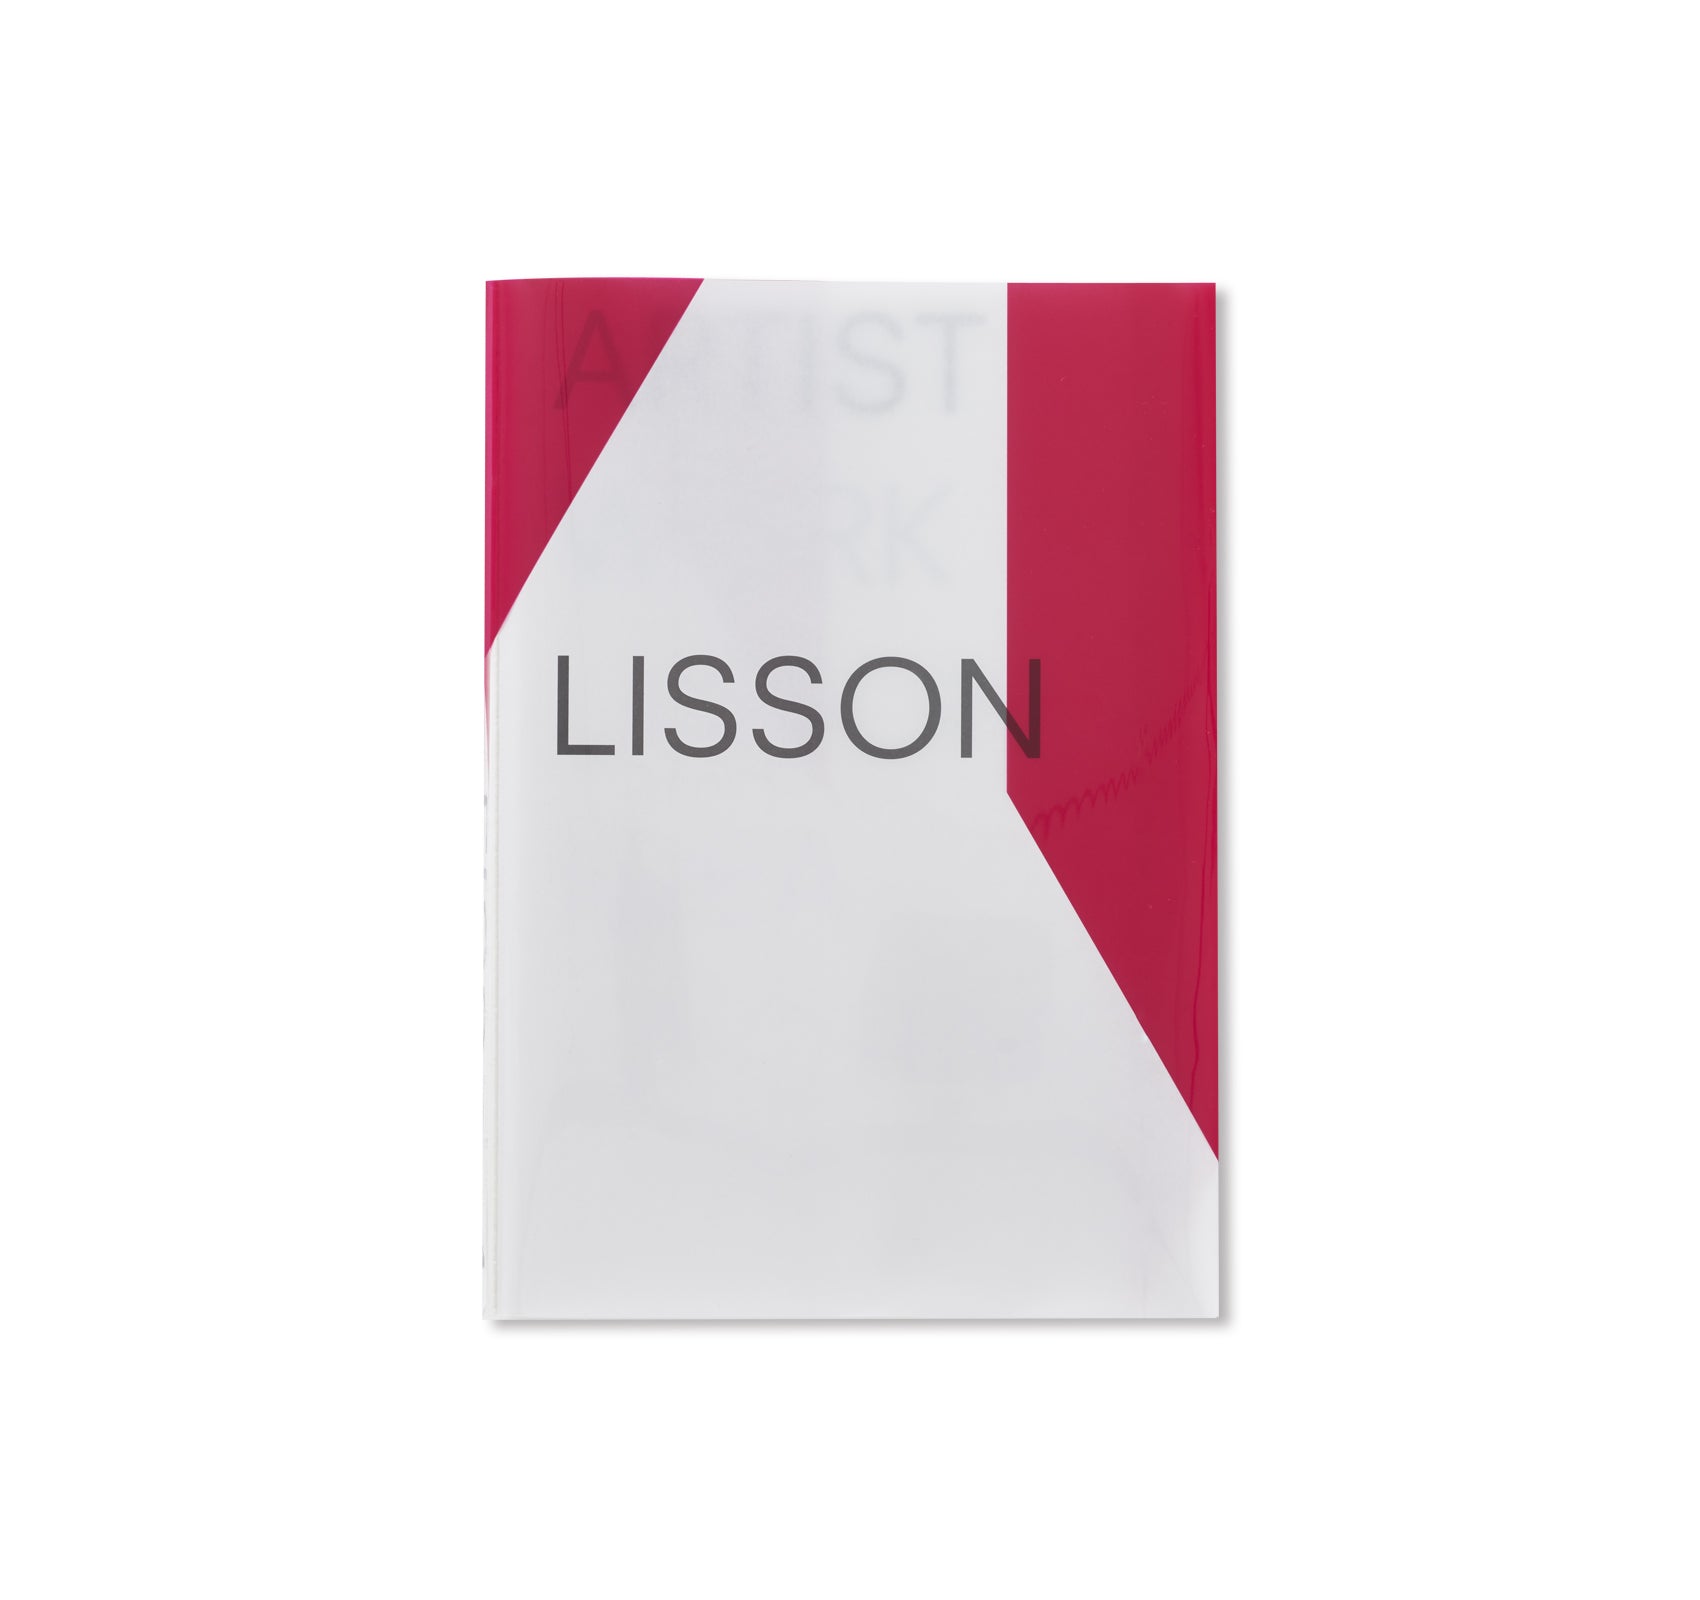 ARTIST | WORK | LISSON with TOTE BAG